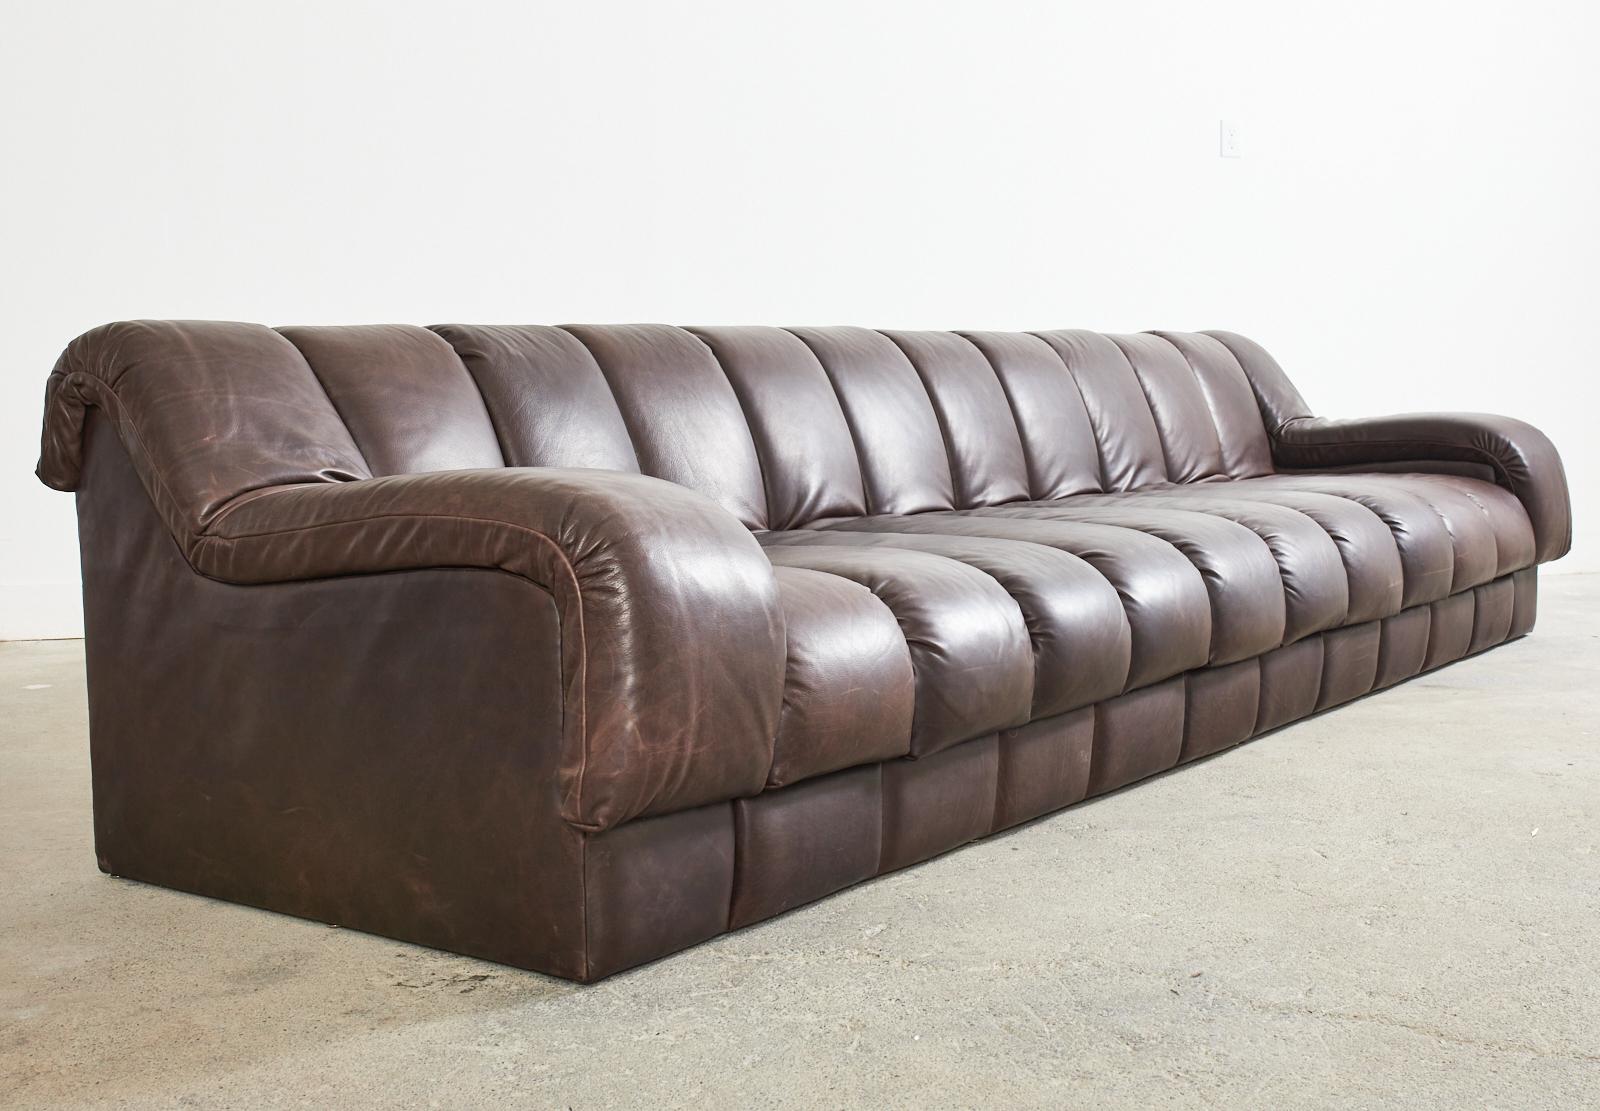 Monumental Steve Chase Monterey Style Channeled Leather Sofa 7